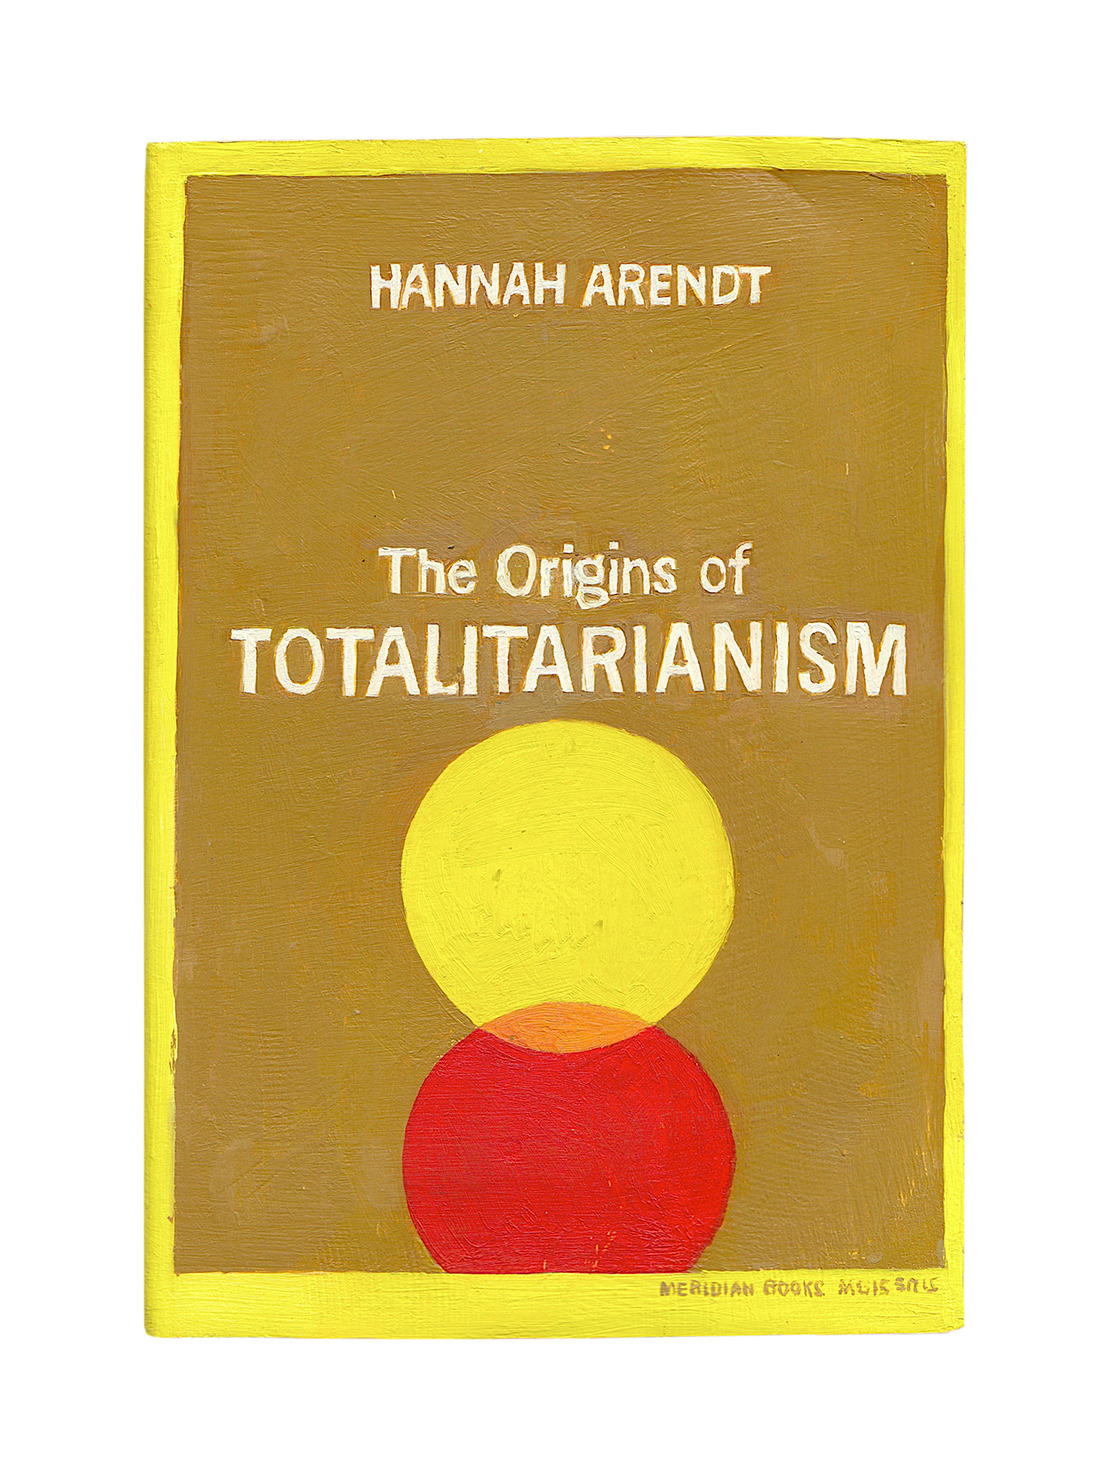 Untitled Project: Robert Smithson Library & Book Club
[Arendt, Hannah, The Origins of Totalitarianism, 1958]
Oil paint on carved wood, 2018